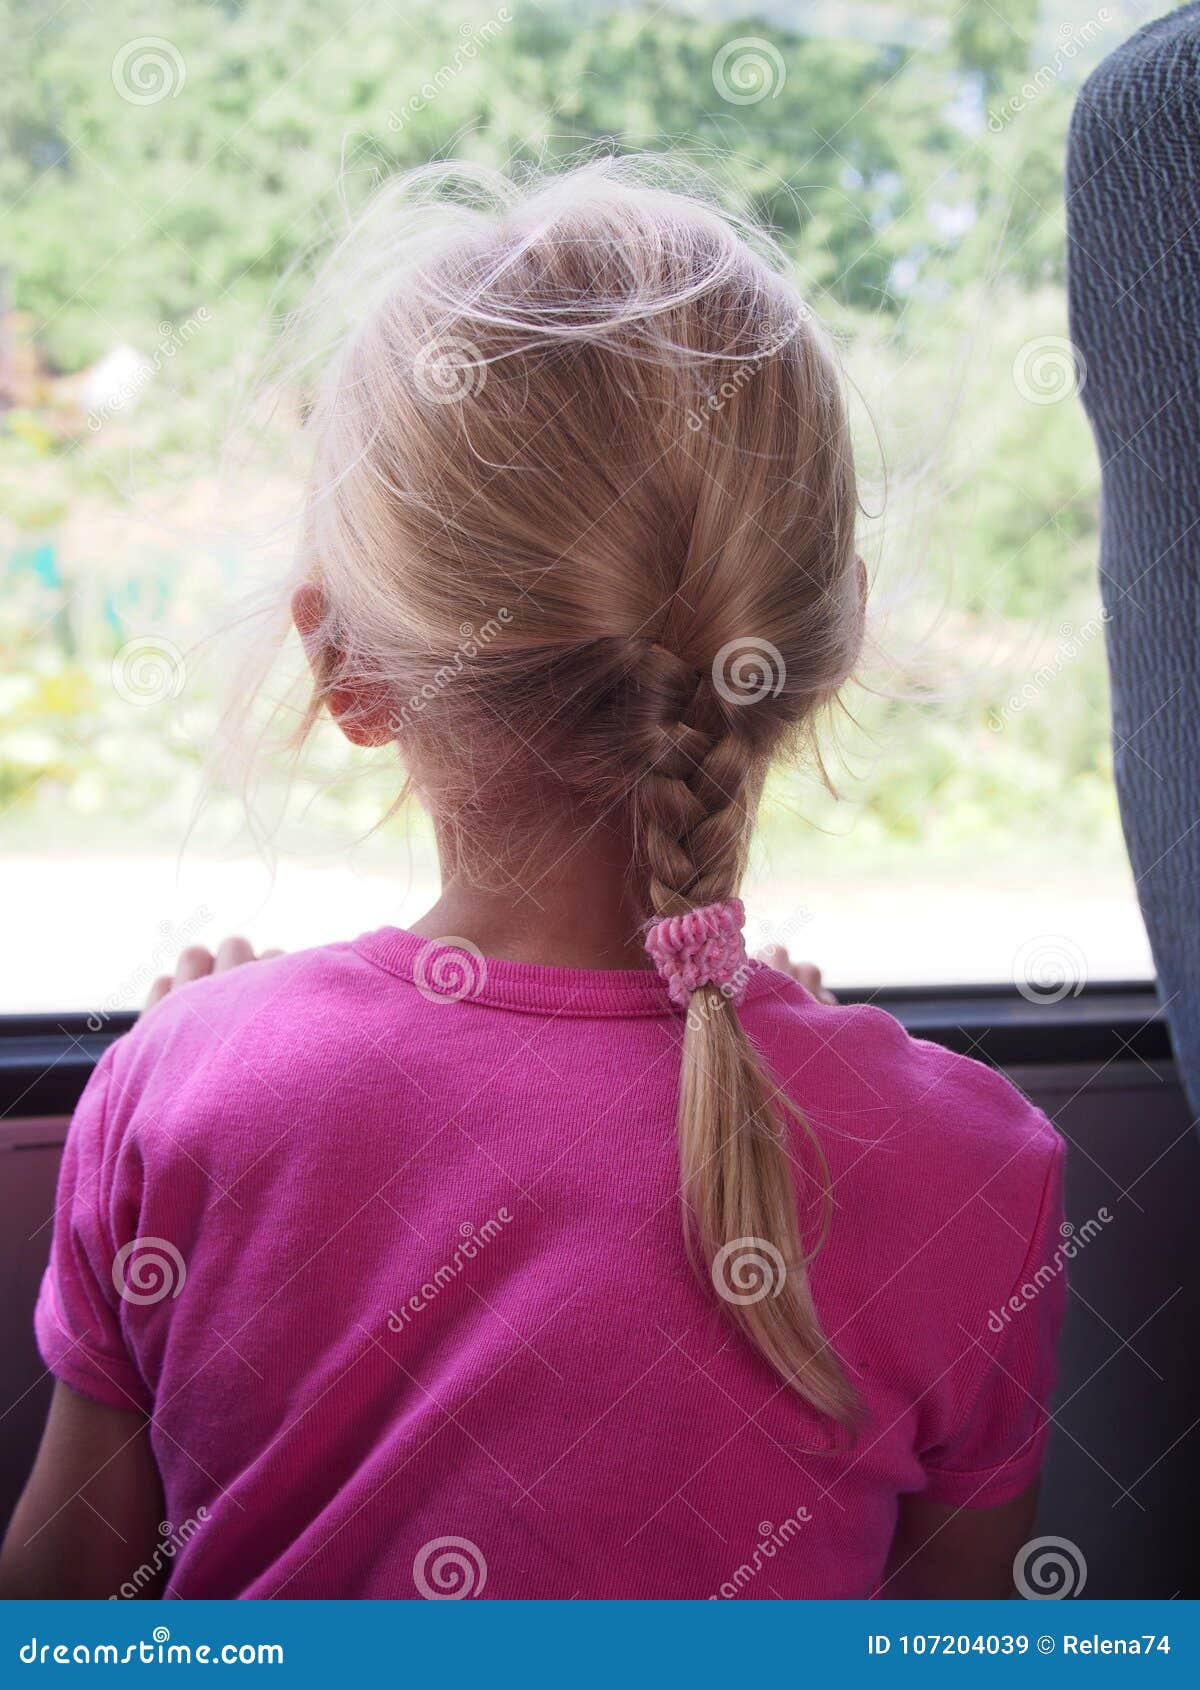 Little girl looking out the window of a bus in summer day